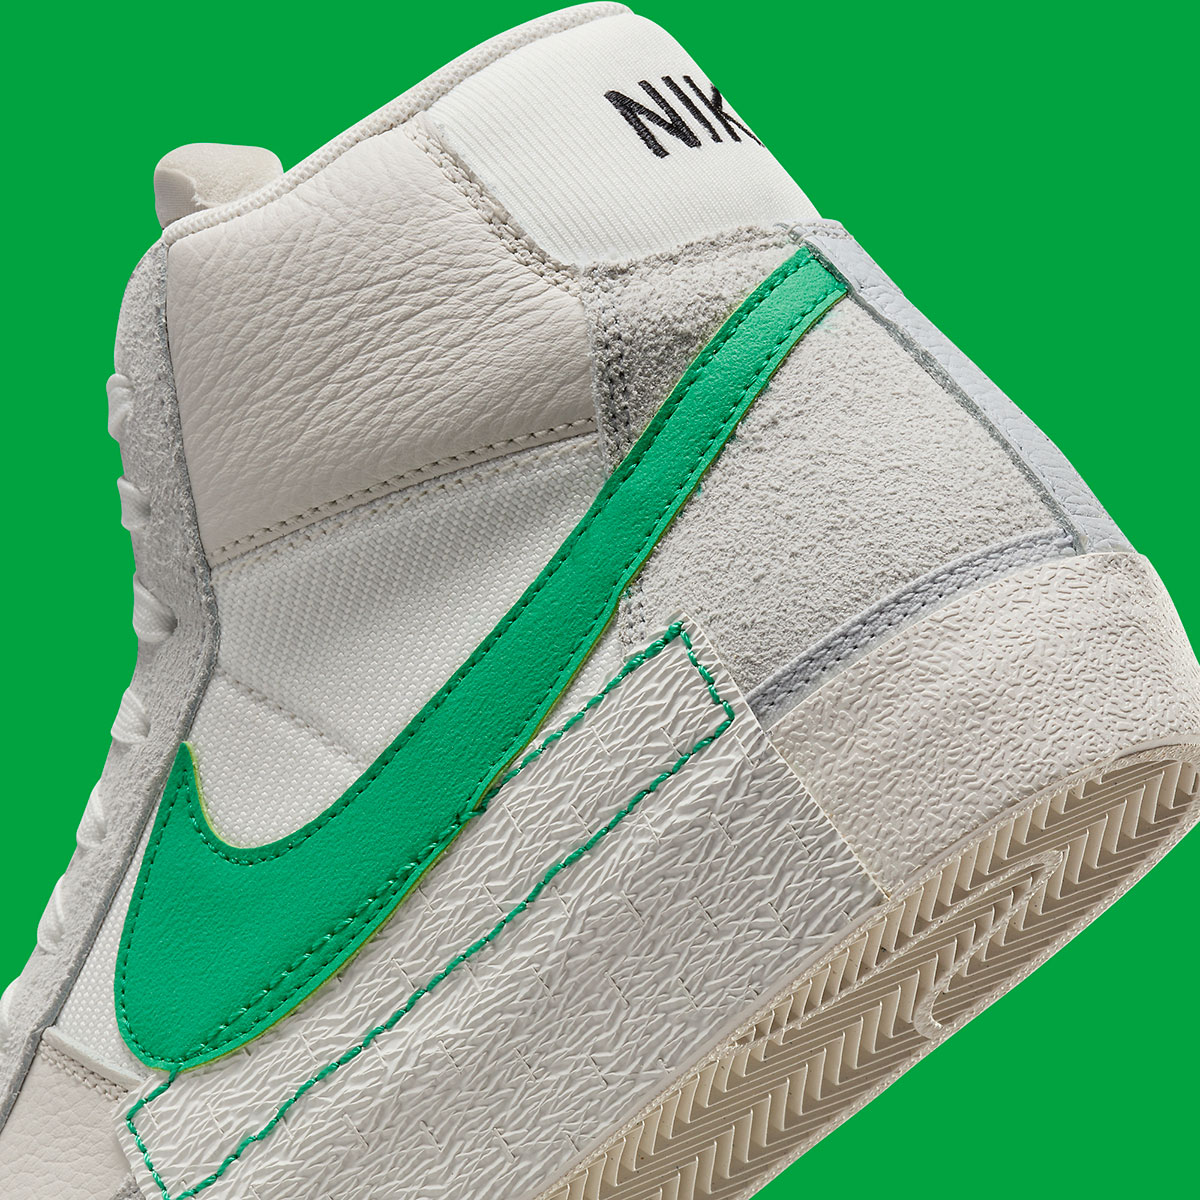 nike color dunk wmns shadow peace light tower images Pro Club Pure Platinum Summit White Stadium Green Dq7673 004 5